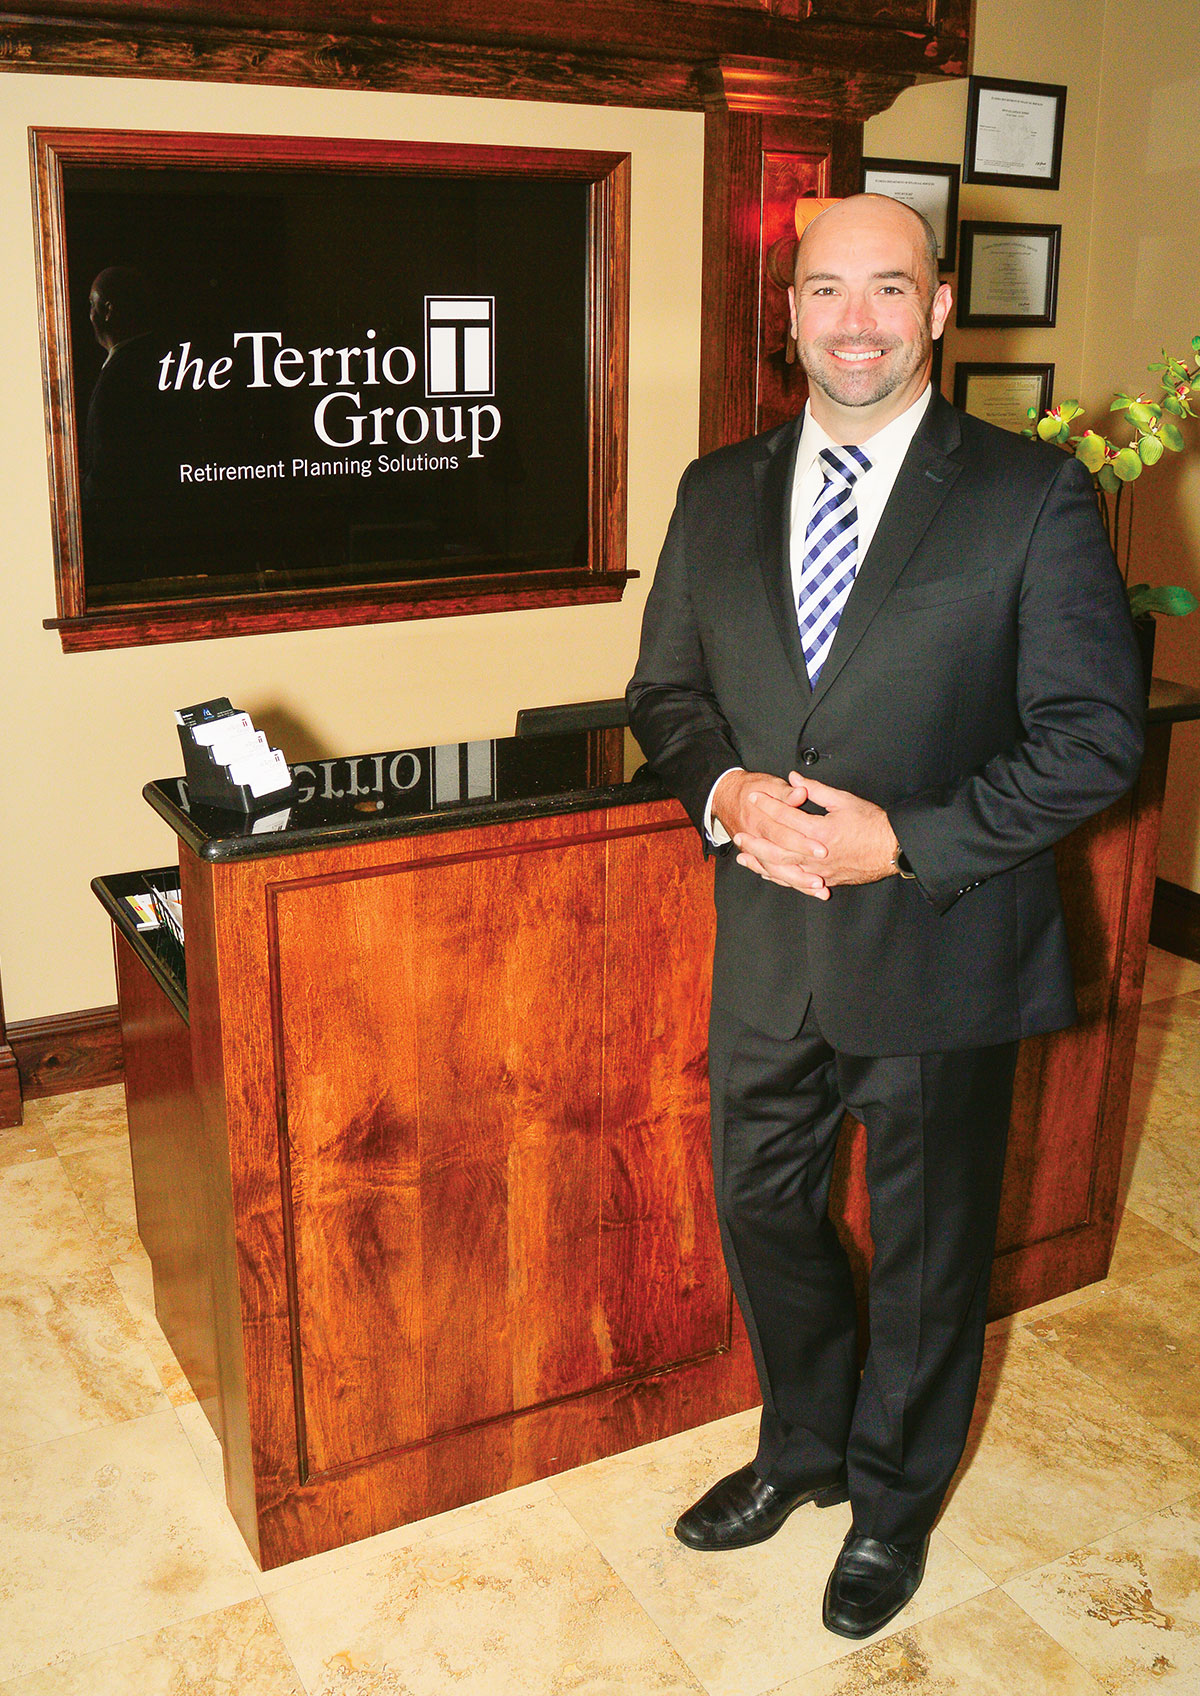 Michael Terrio, CEO and President of the Terrio Group